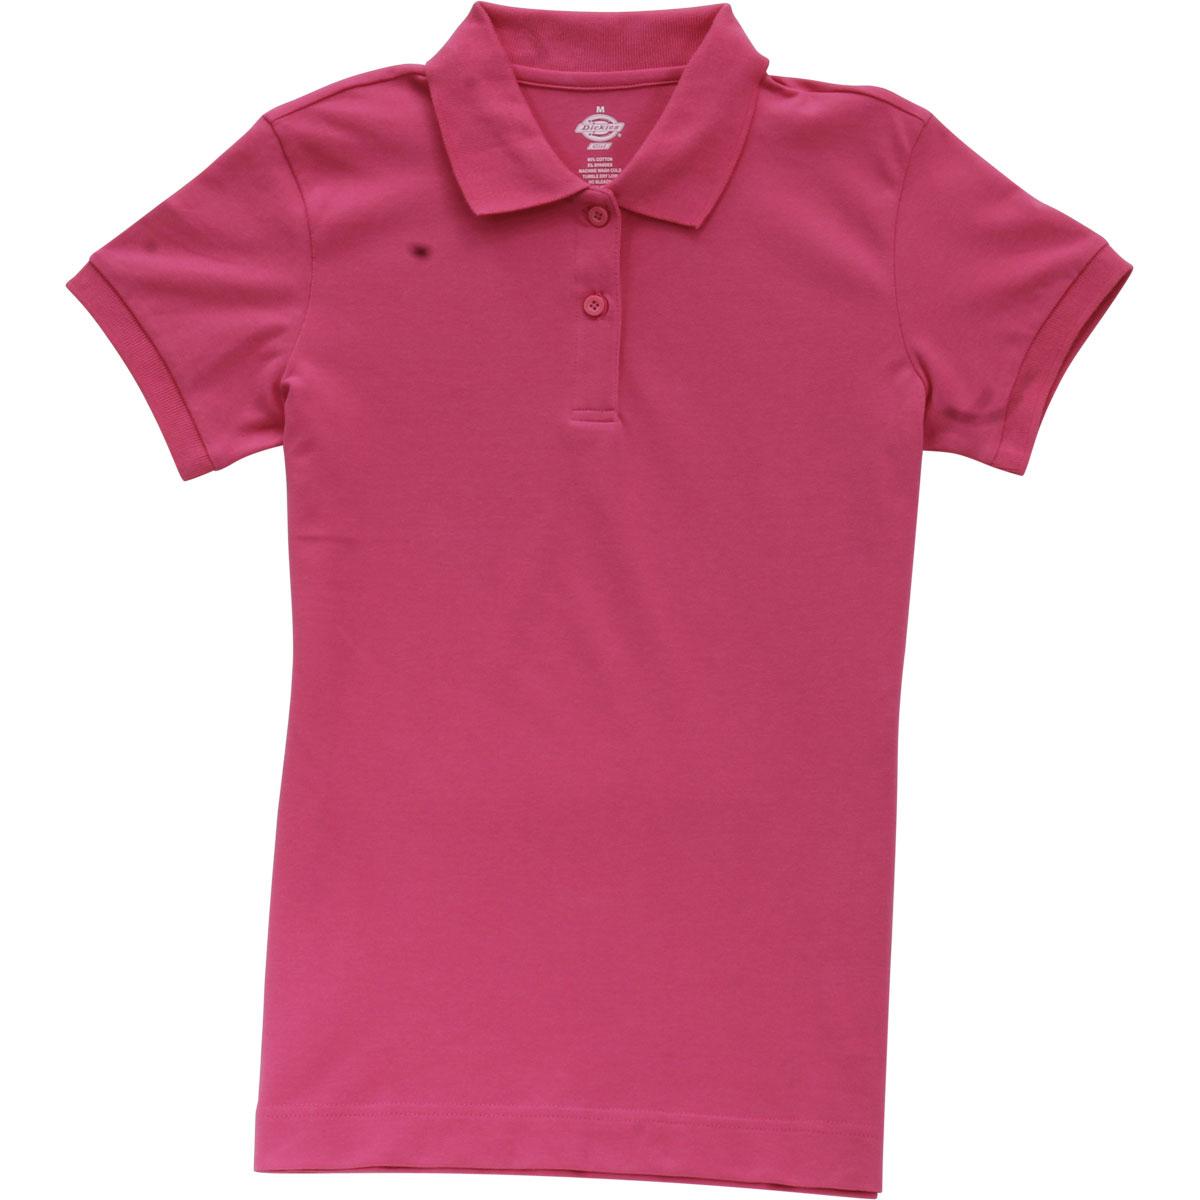 Dickies Girl Junior's 2 Button Short Sleeve Stretch Pique Polo Shirt - Lipstick Pink - Small